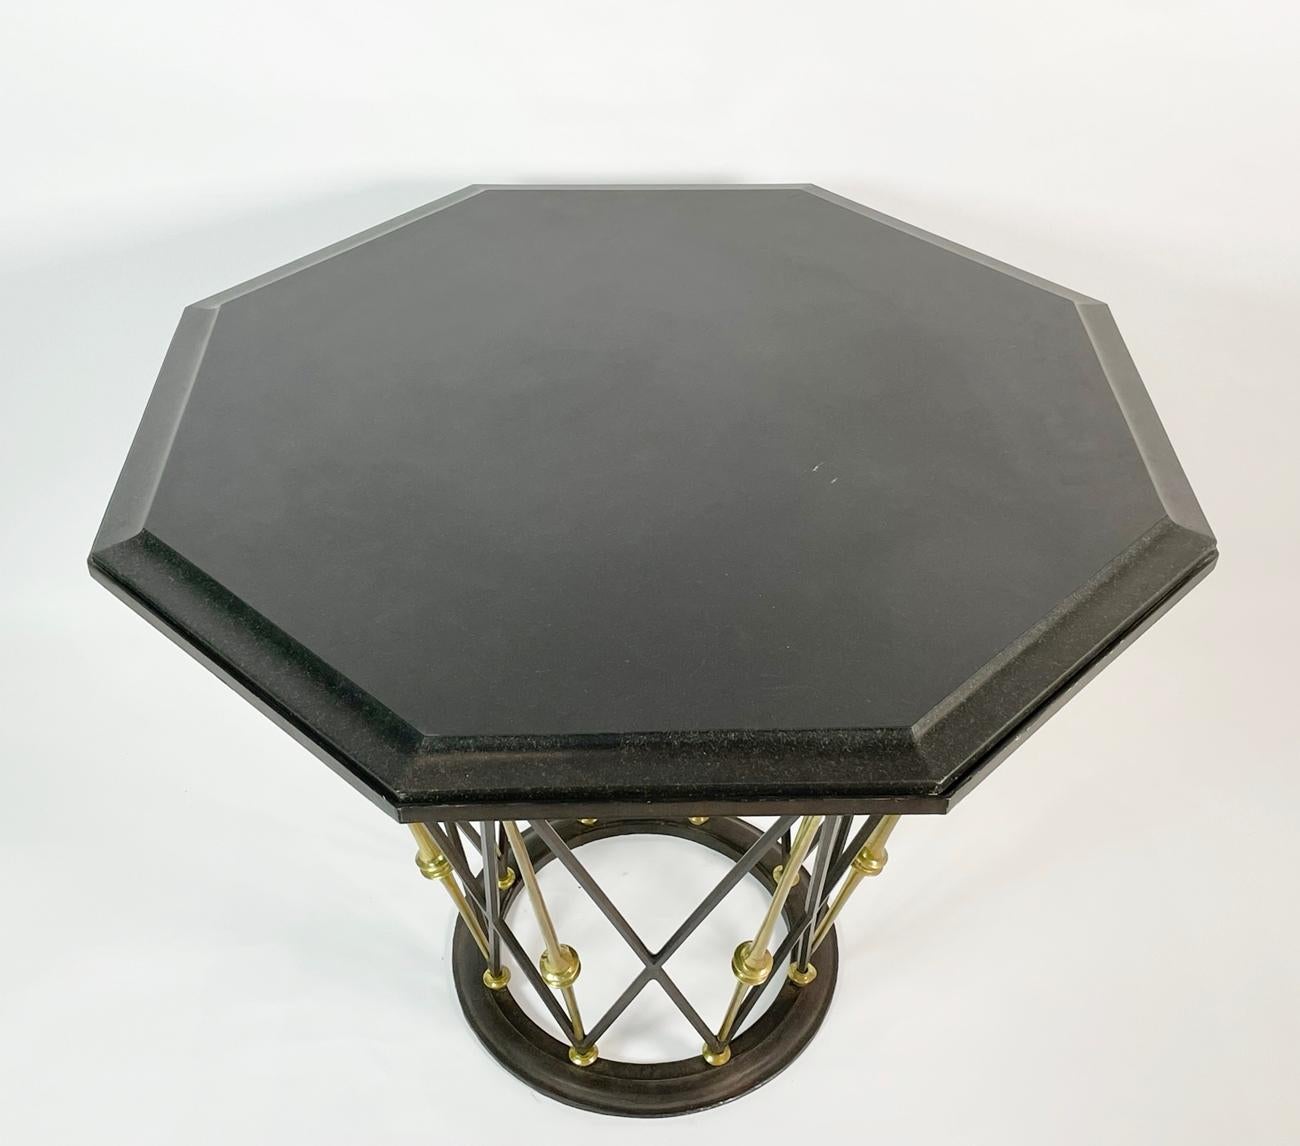 Stunningly beautiful center table made in France.
The table's base is made in a combination of wrought iron and solid brass laticced giving it a very unique look.

The top has an octagonal shape encasing a black slate top.

Measurements:
40